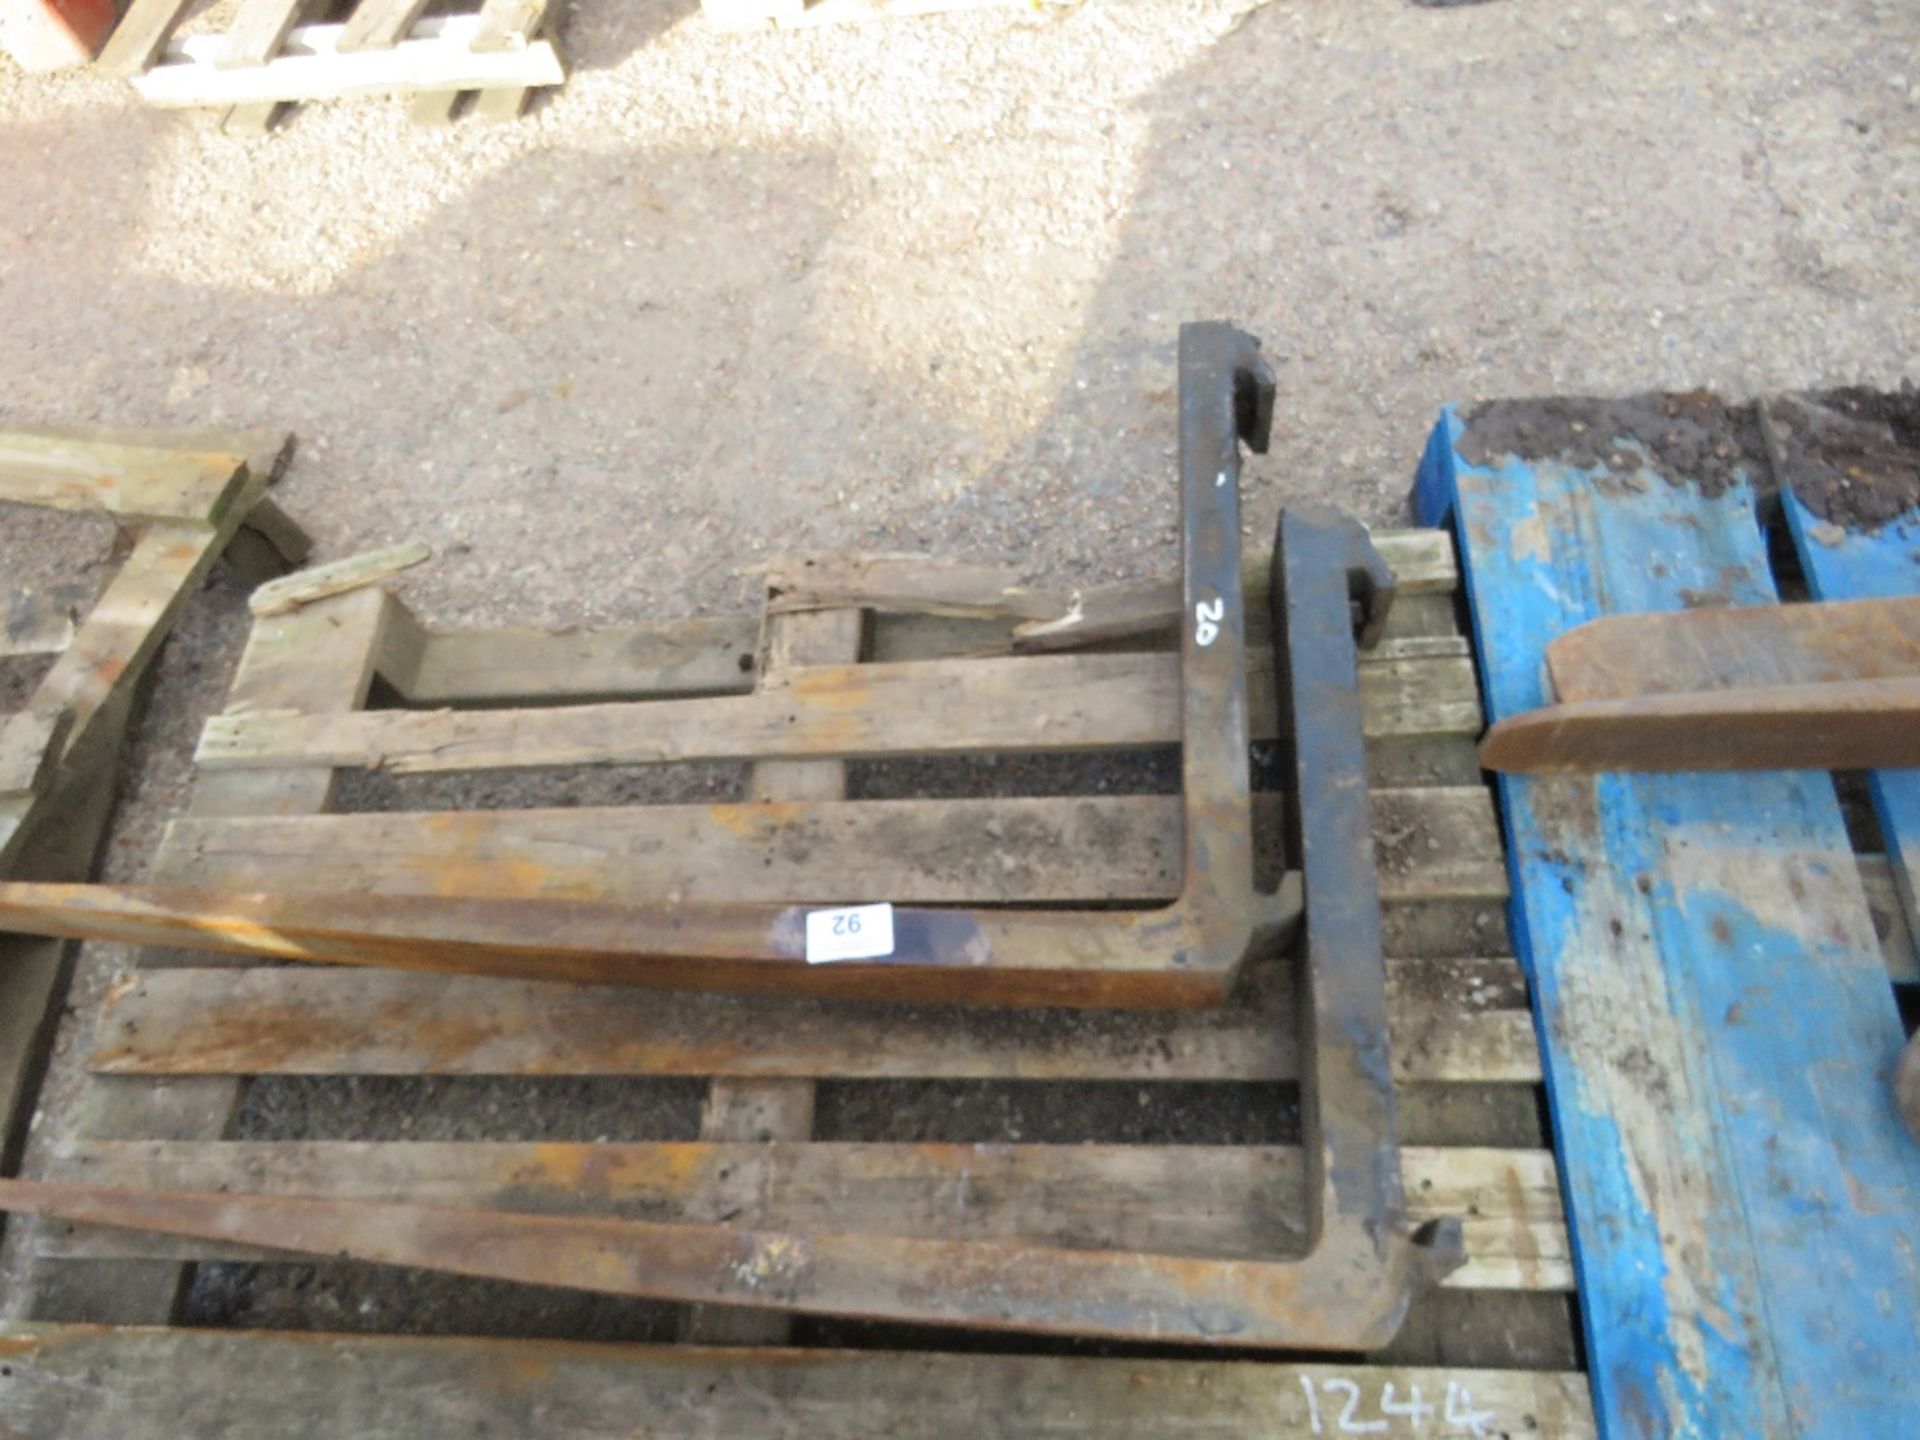 PAIR OF FORKLIFT TINES FOR 20" CARRIAGE. - Image 3 of 3